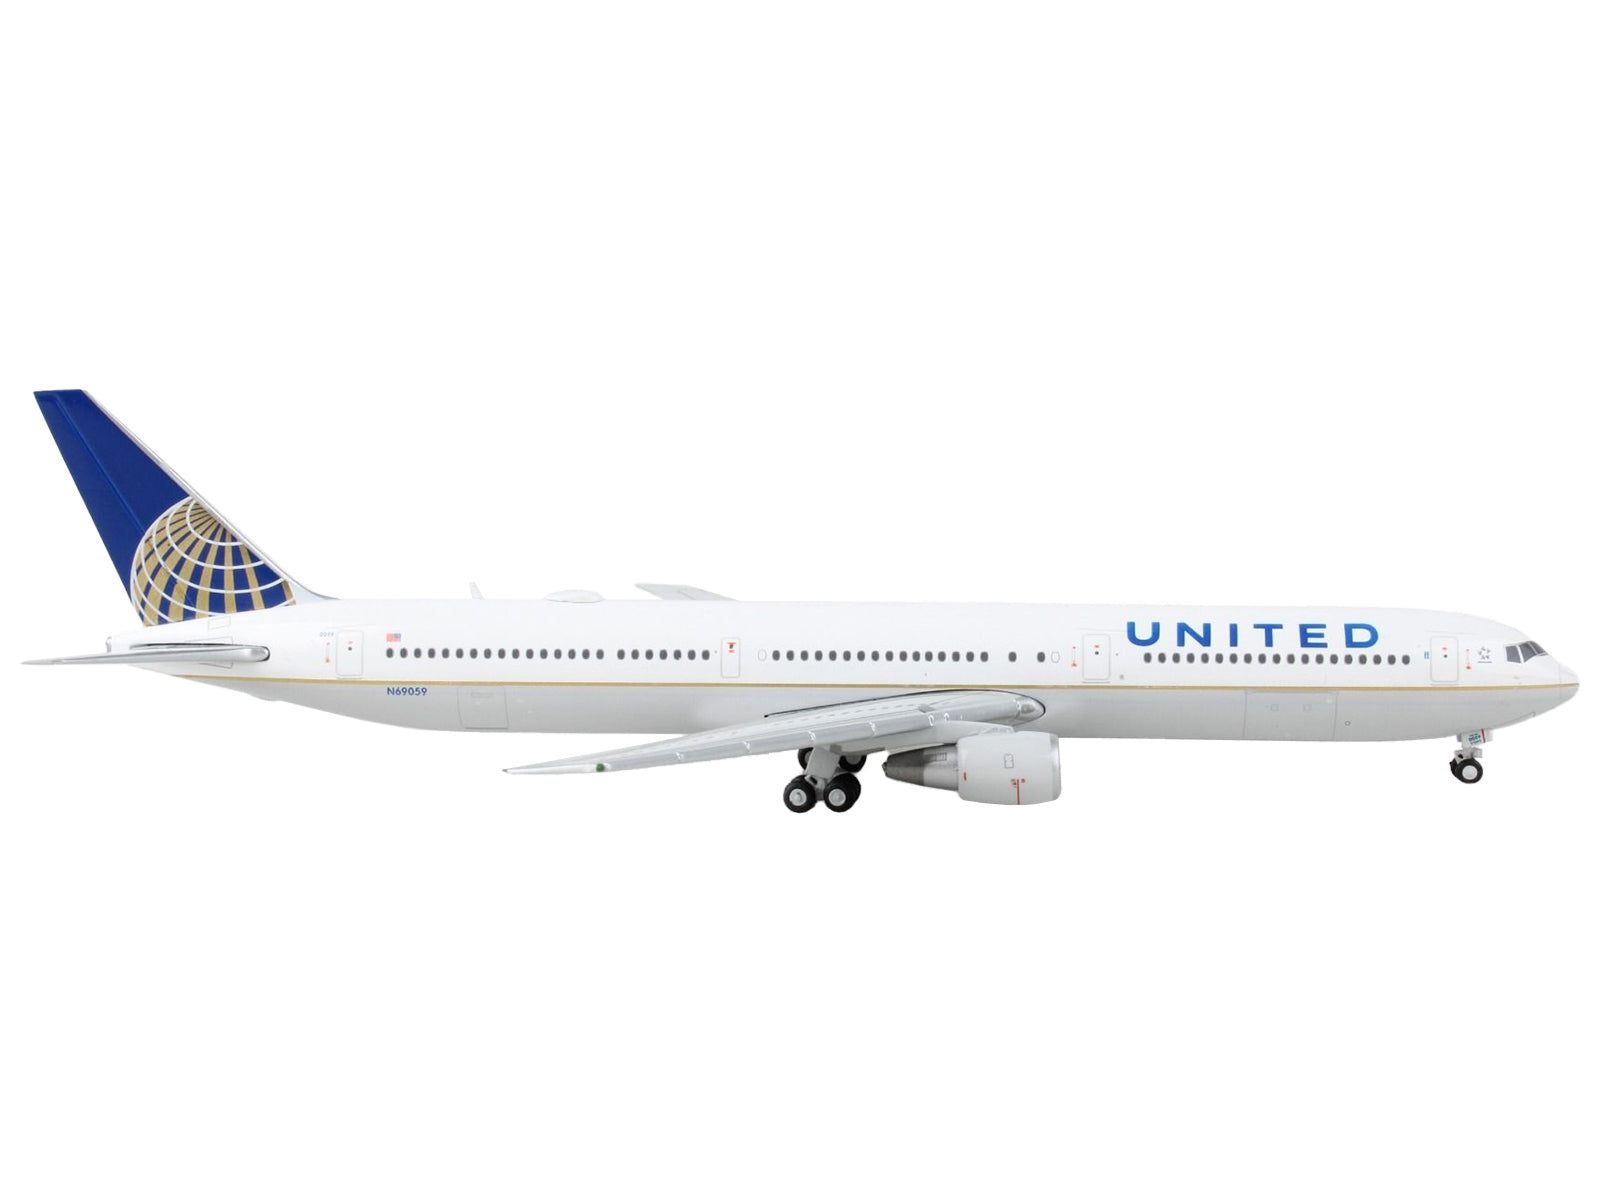 Boeing 767-400ER Commercial Aircraft "United Airlines" White with Blue Tail 1/400 Diecast Model Airplane by GeminiJets